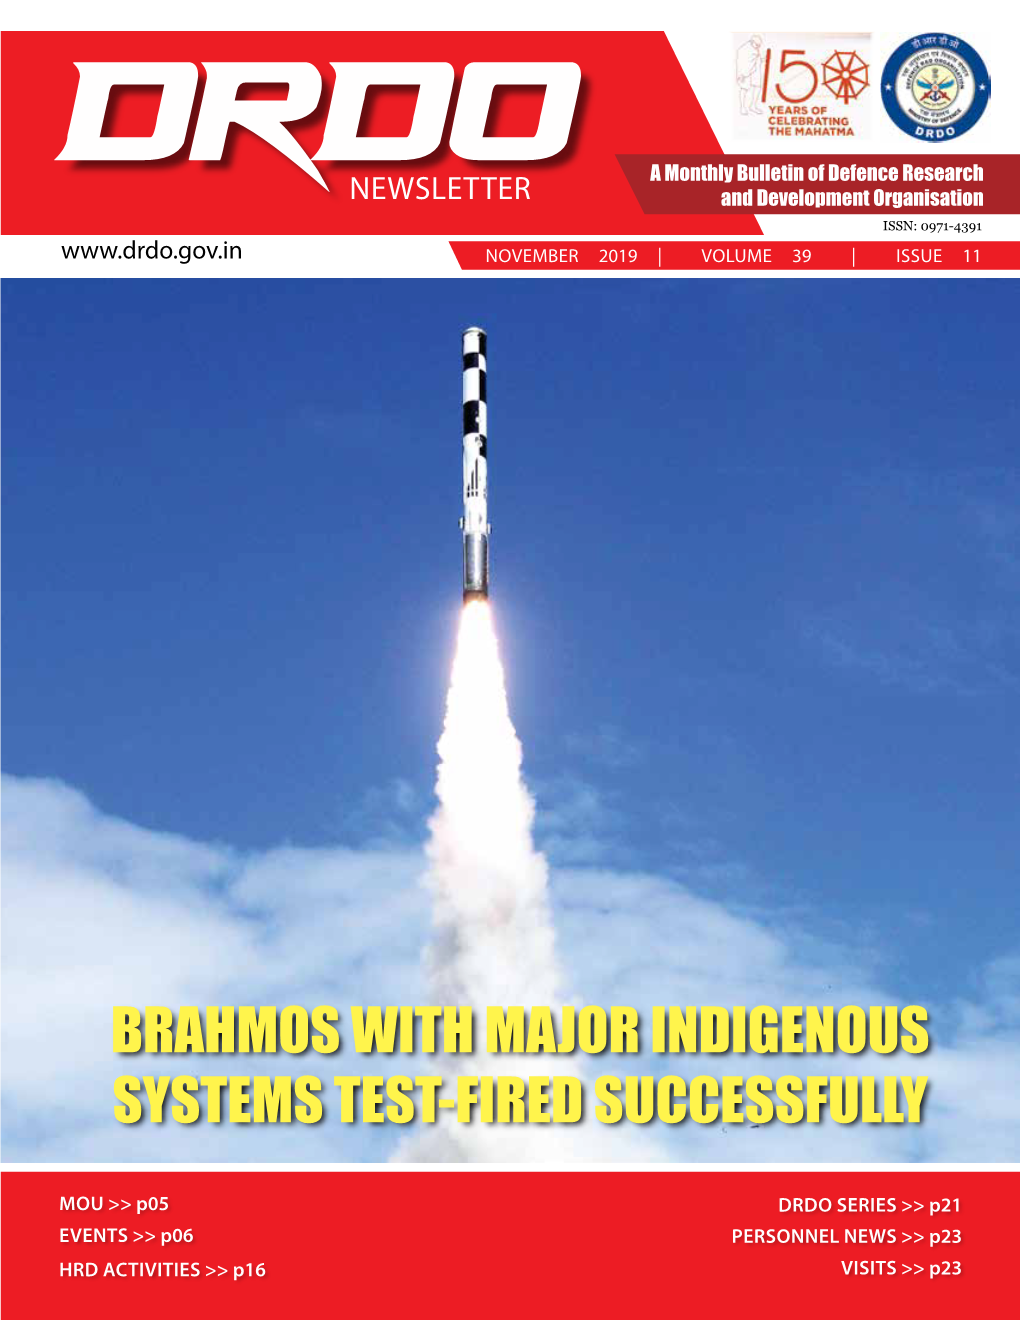 BRAHMOS with Major Indigenous Systems Test-Fired Successfully